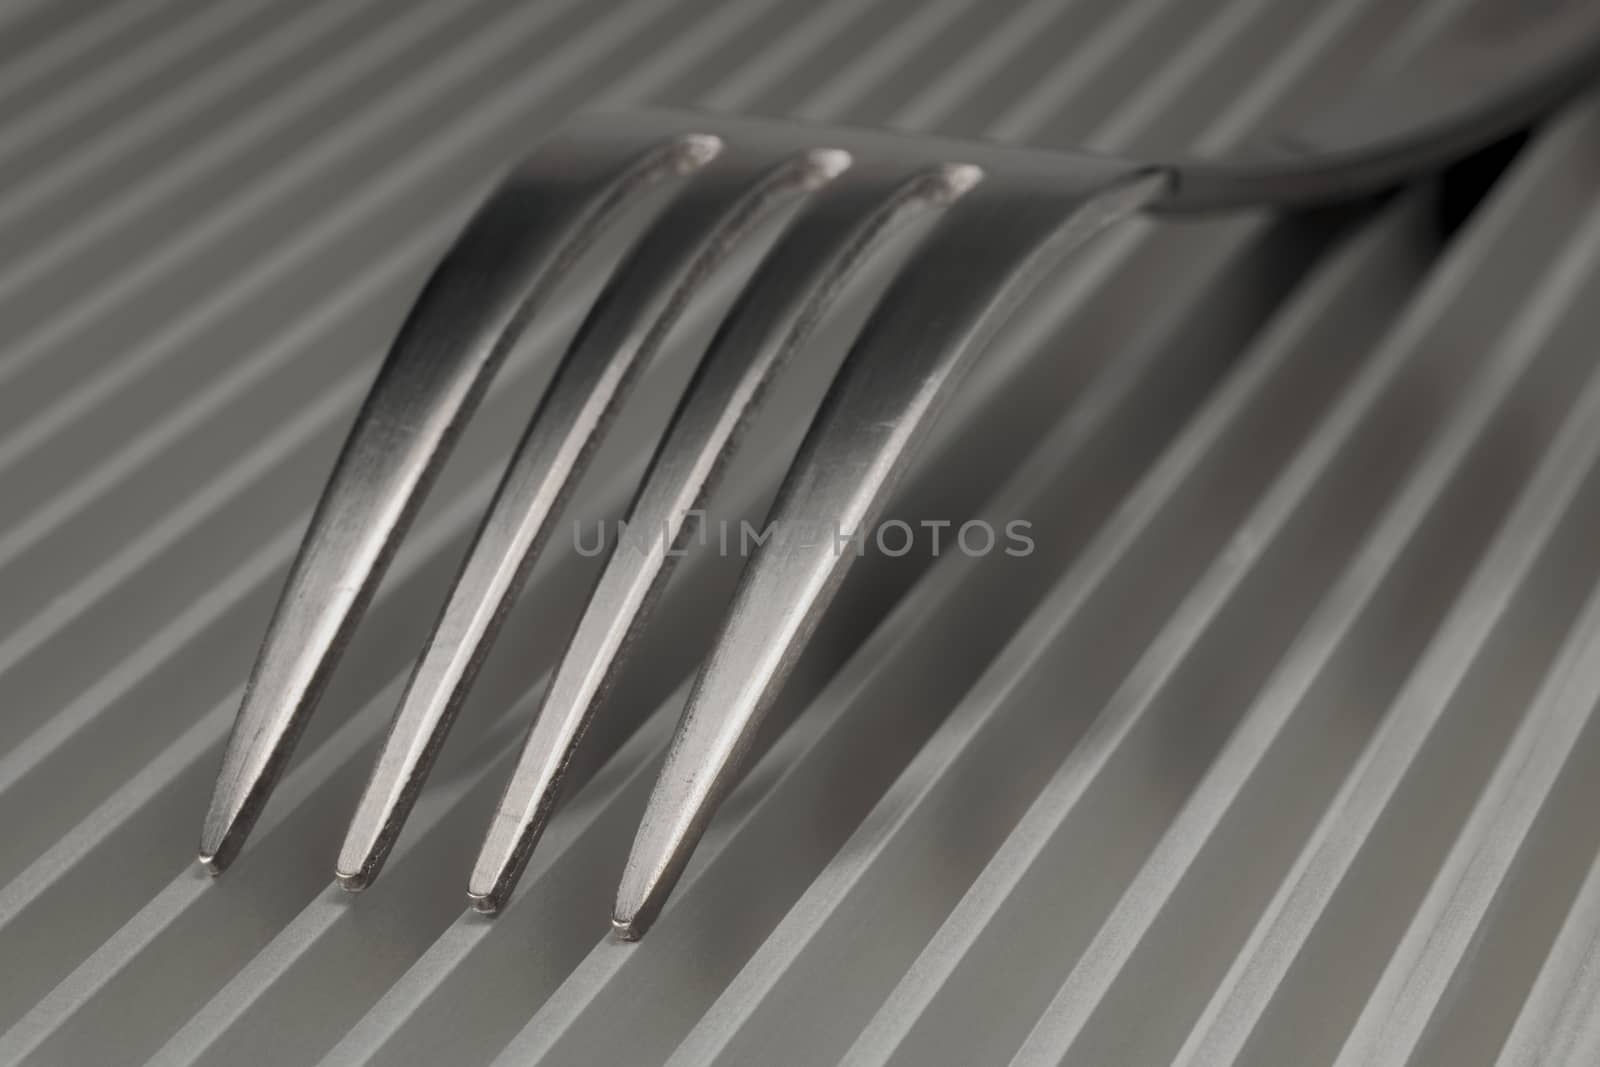 A photo of a fork
 by Tofotografie